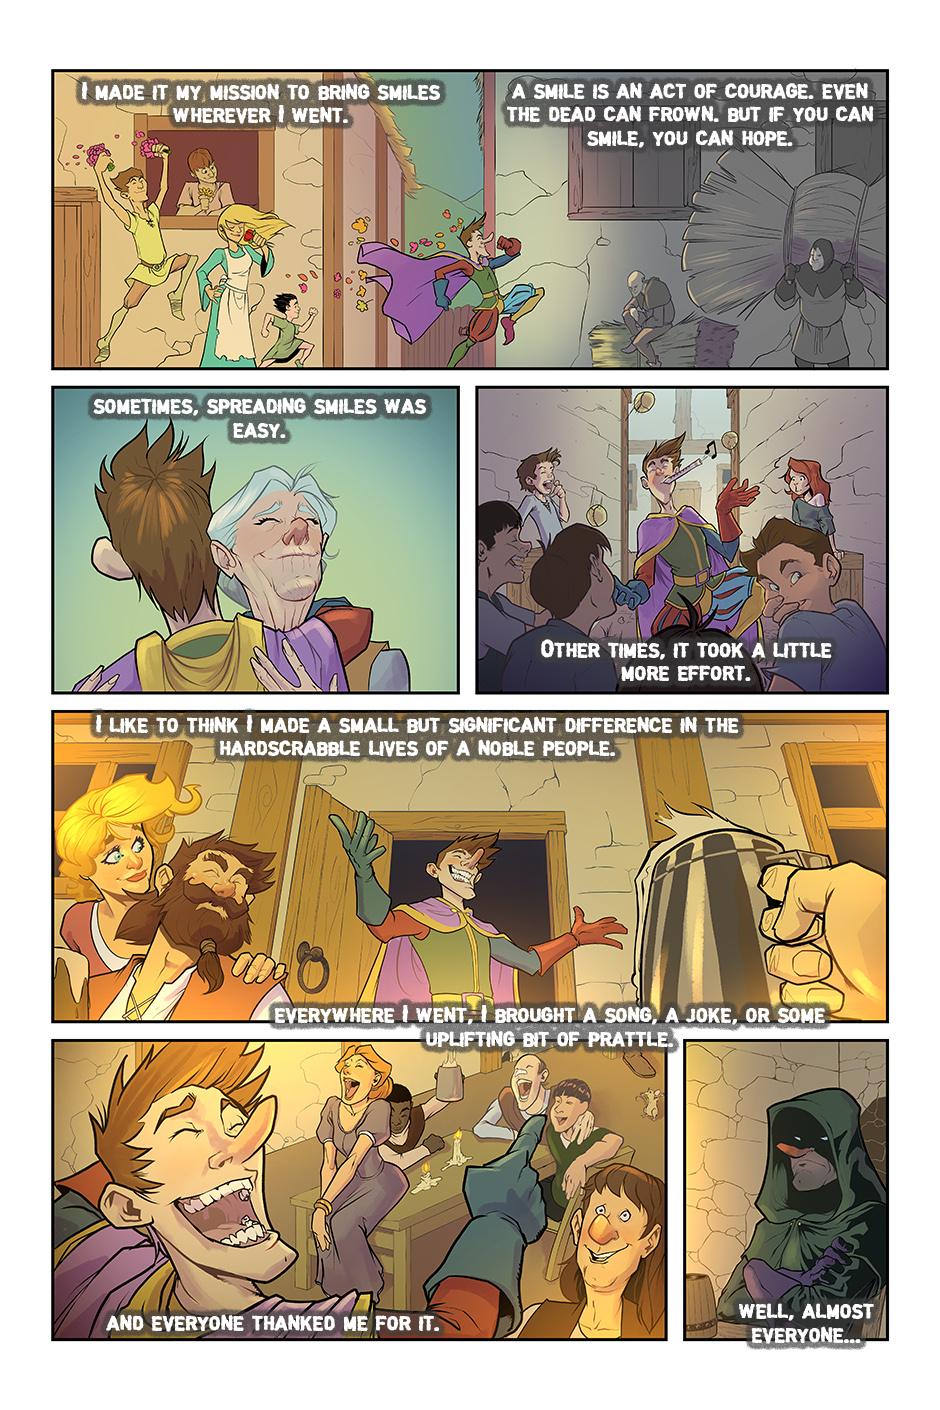 Page 179